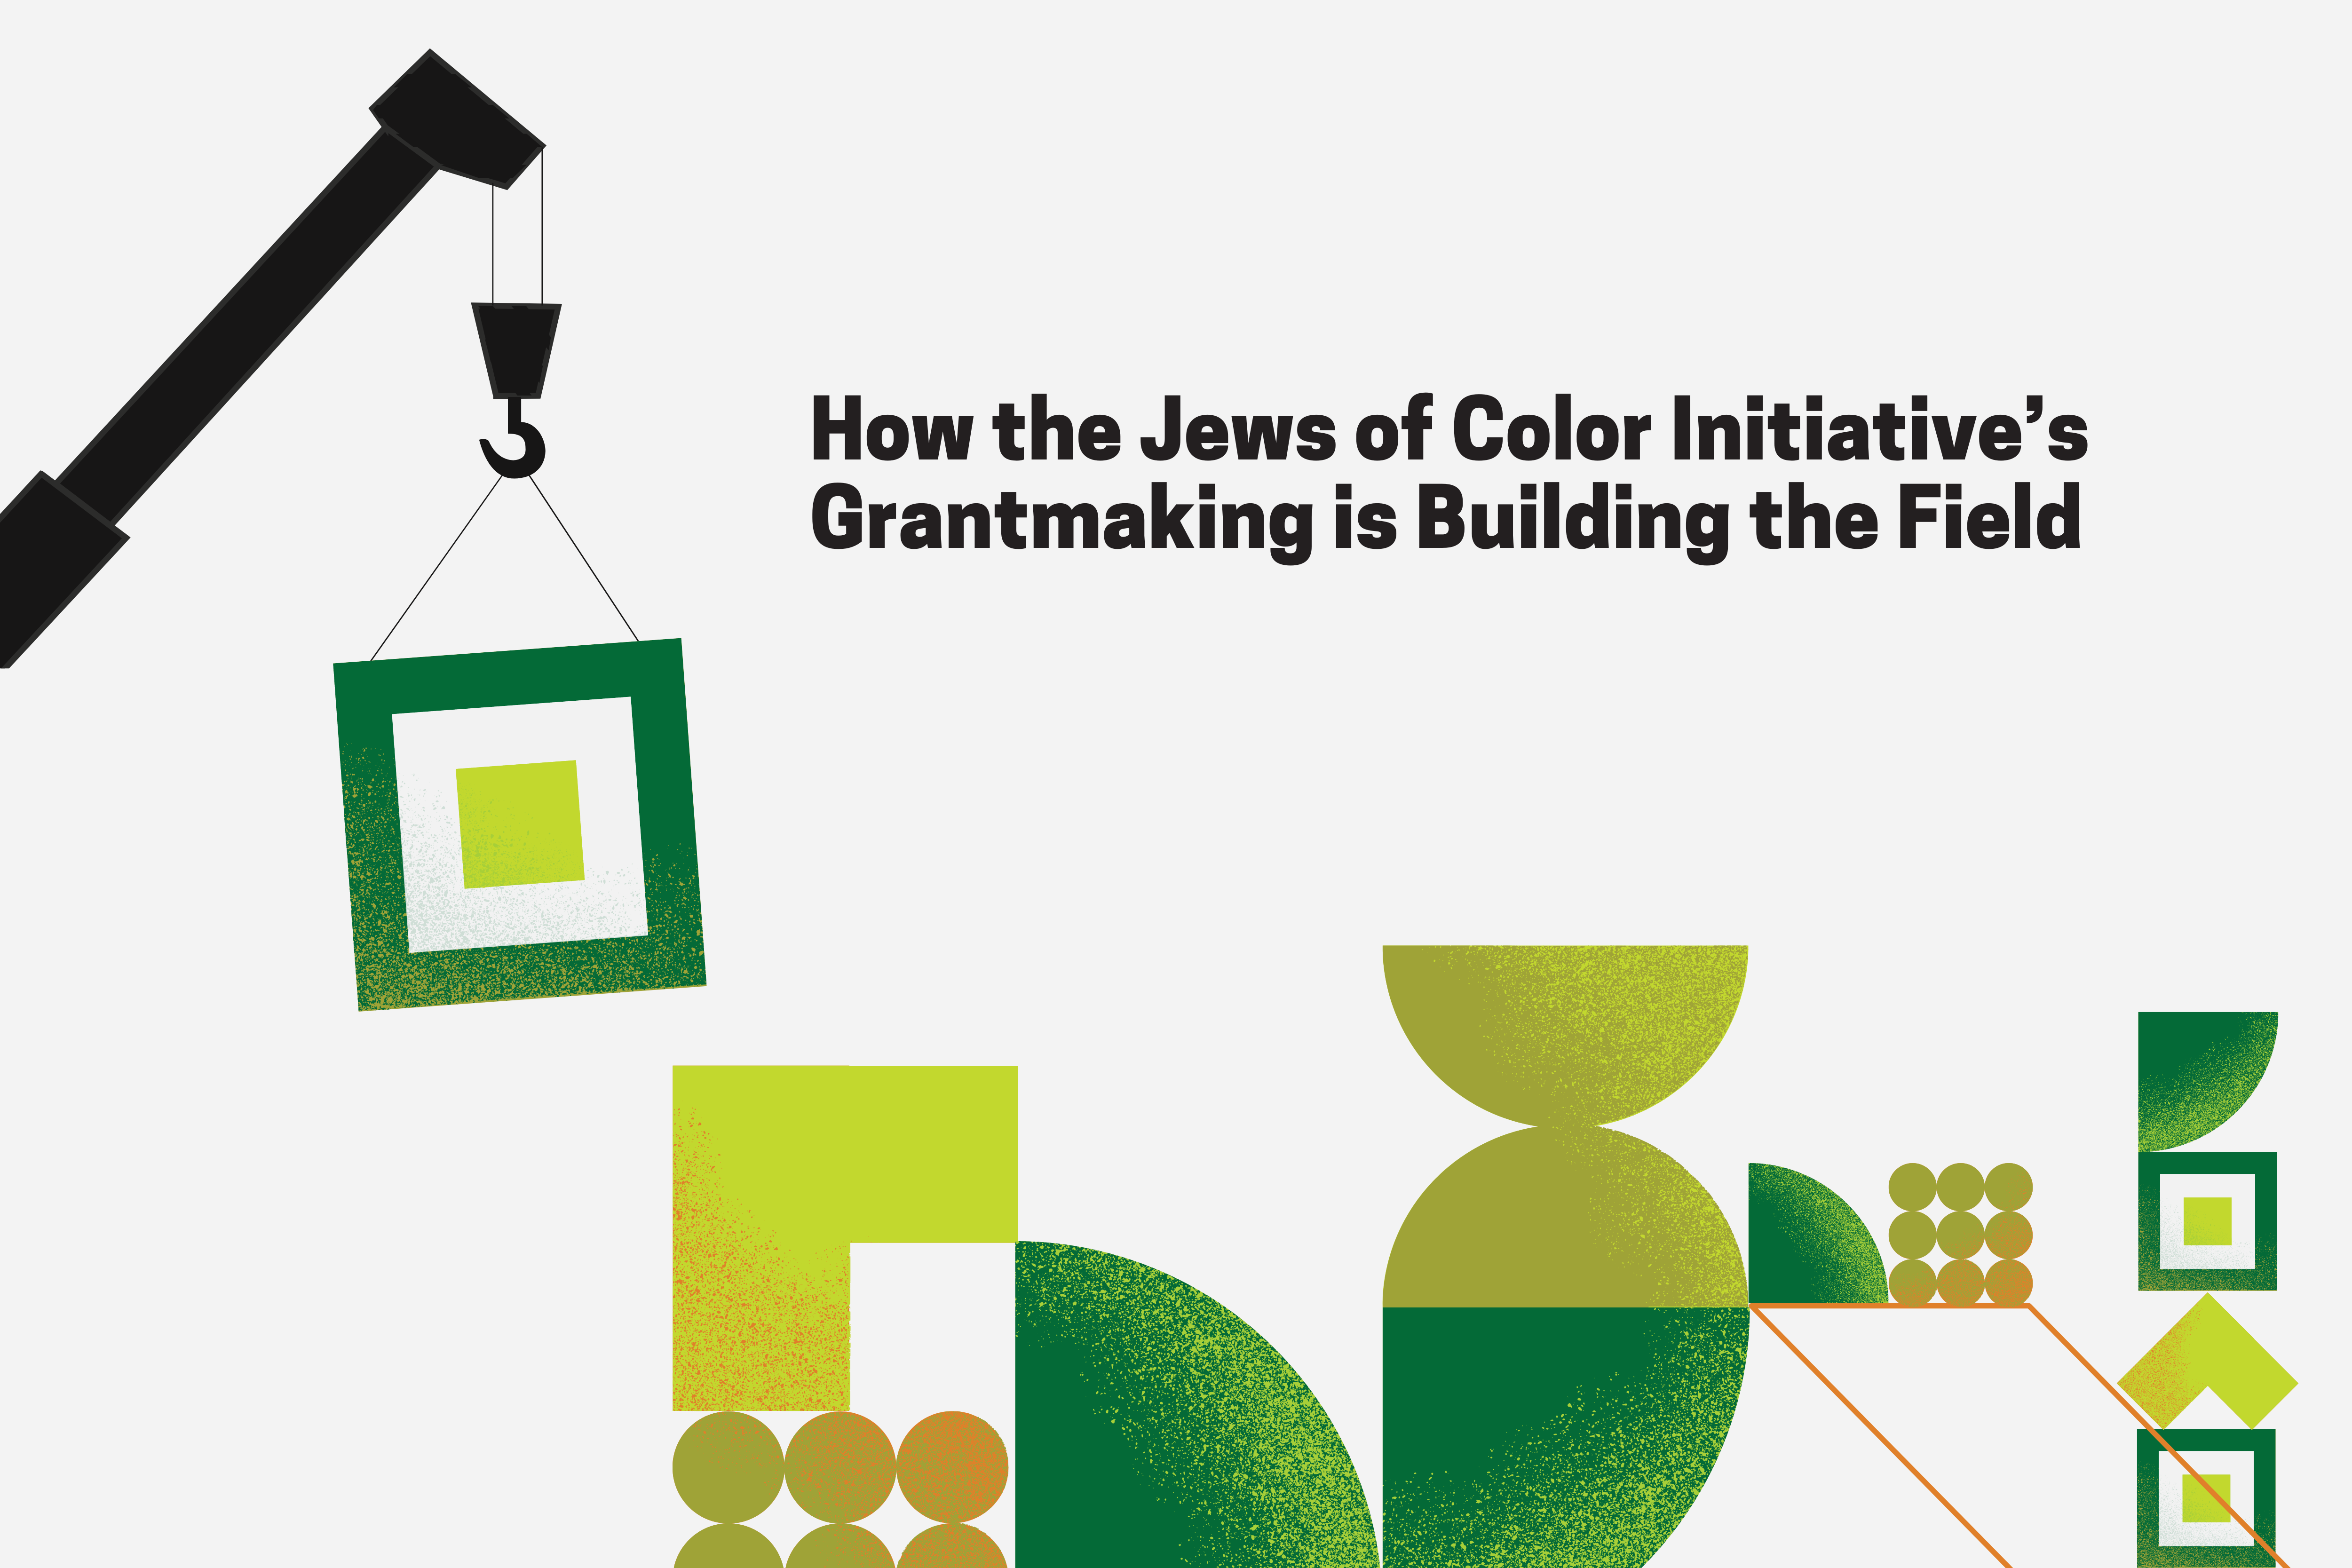 How the Jews of Color Initiative's Grantmaking is Building the Field; green and orange geometric shapes with a silhouette of a crane lifting one of the shapes